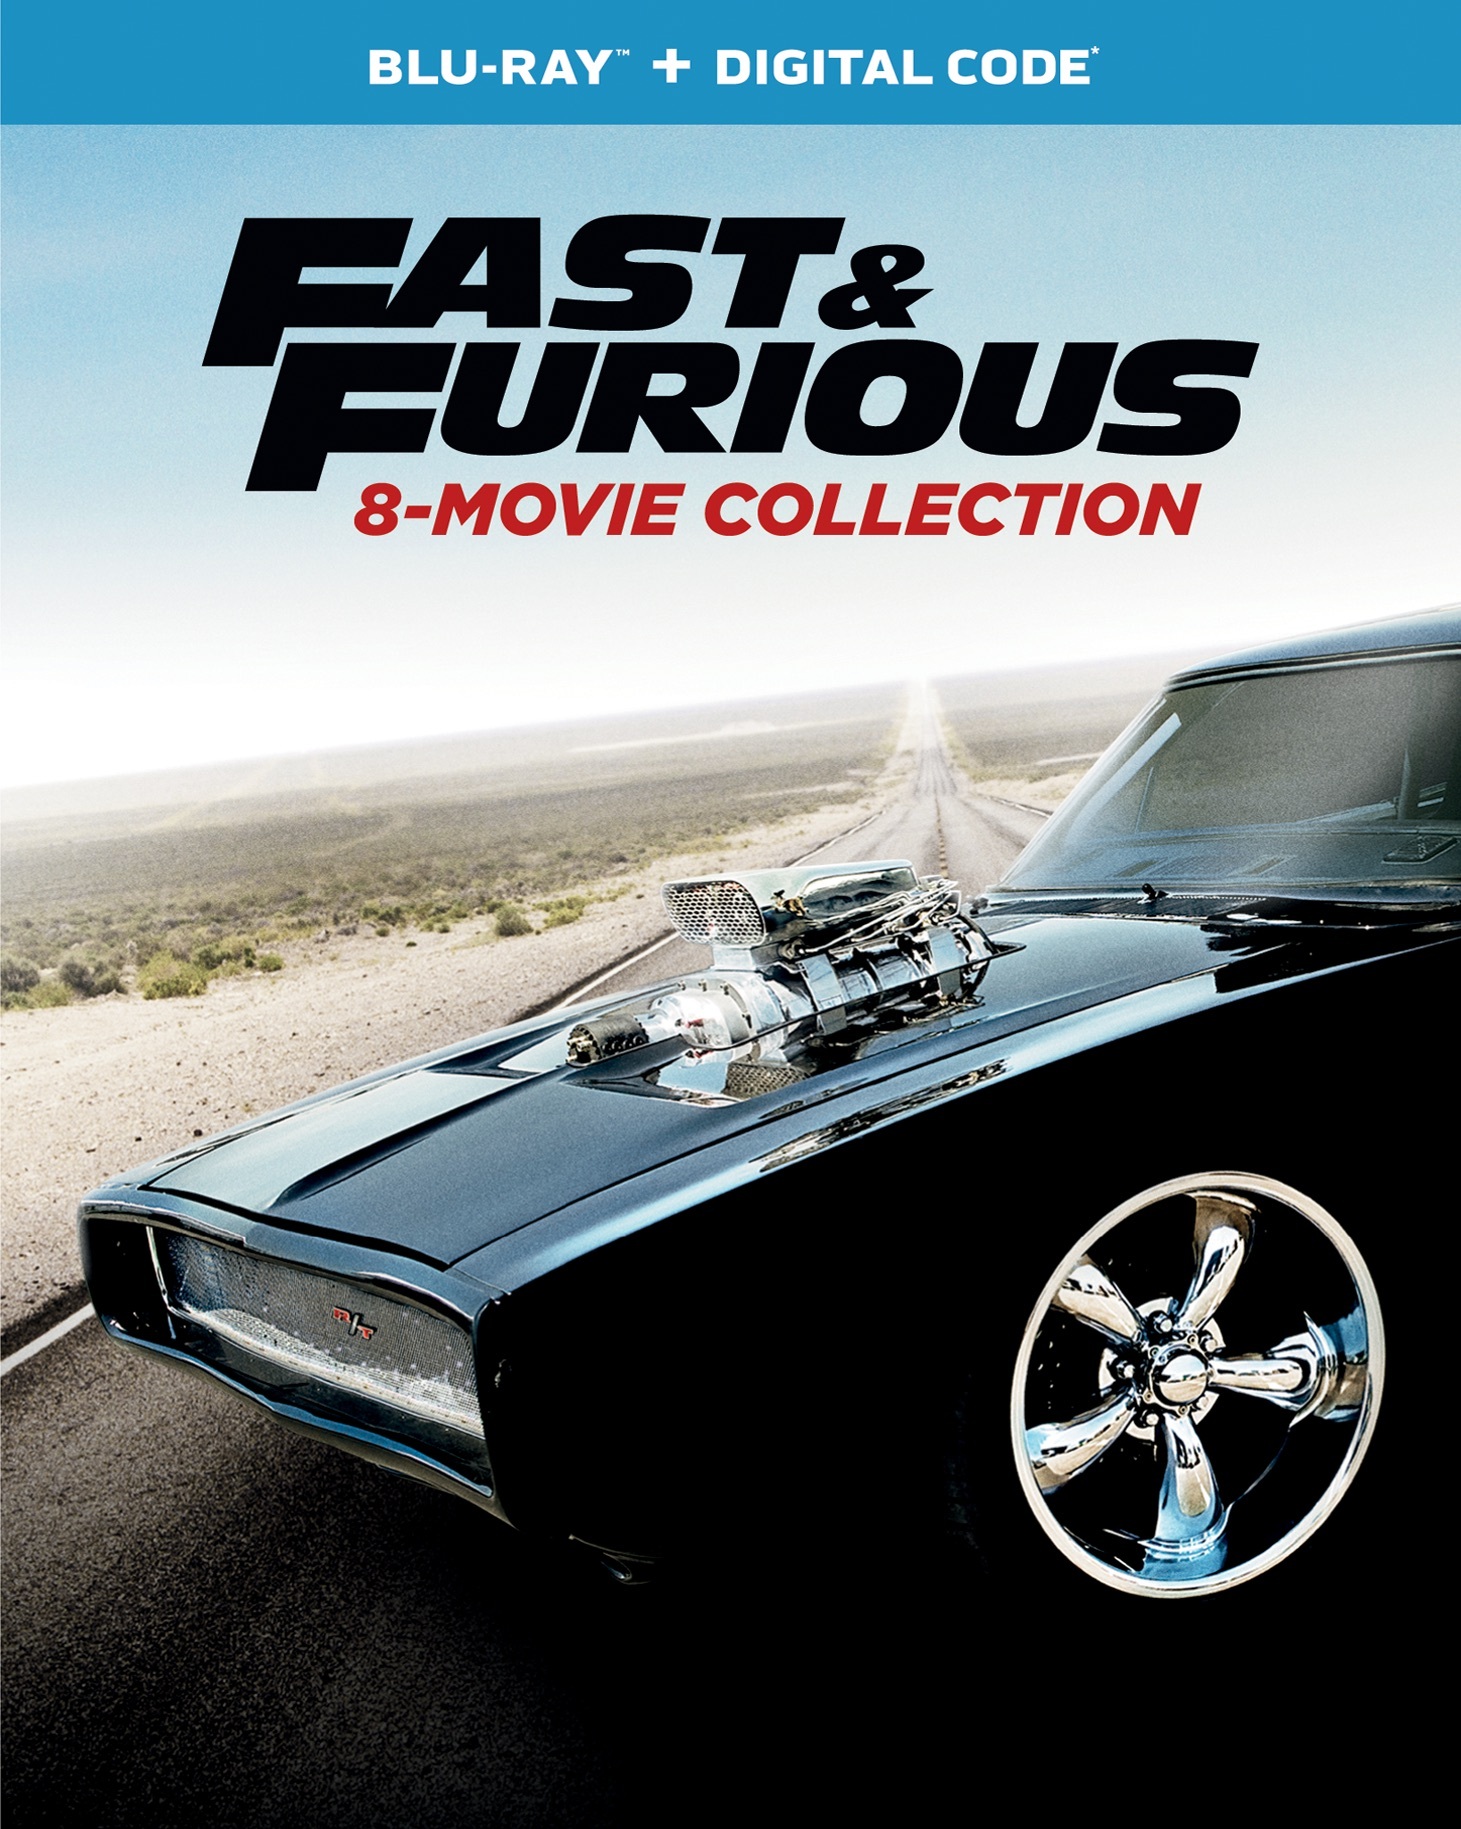 Fast & Furious: 8-movie Collection - Blu-ray [ 2017 ] - Action Movies on Blu-ray